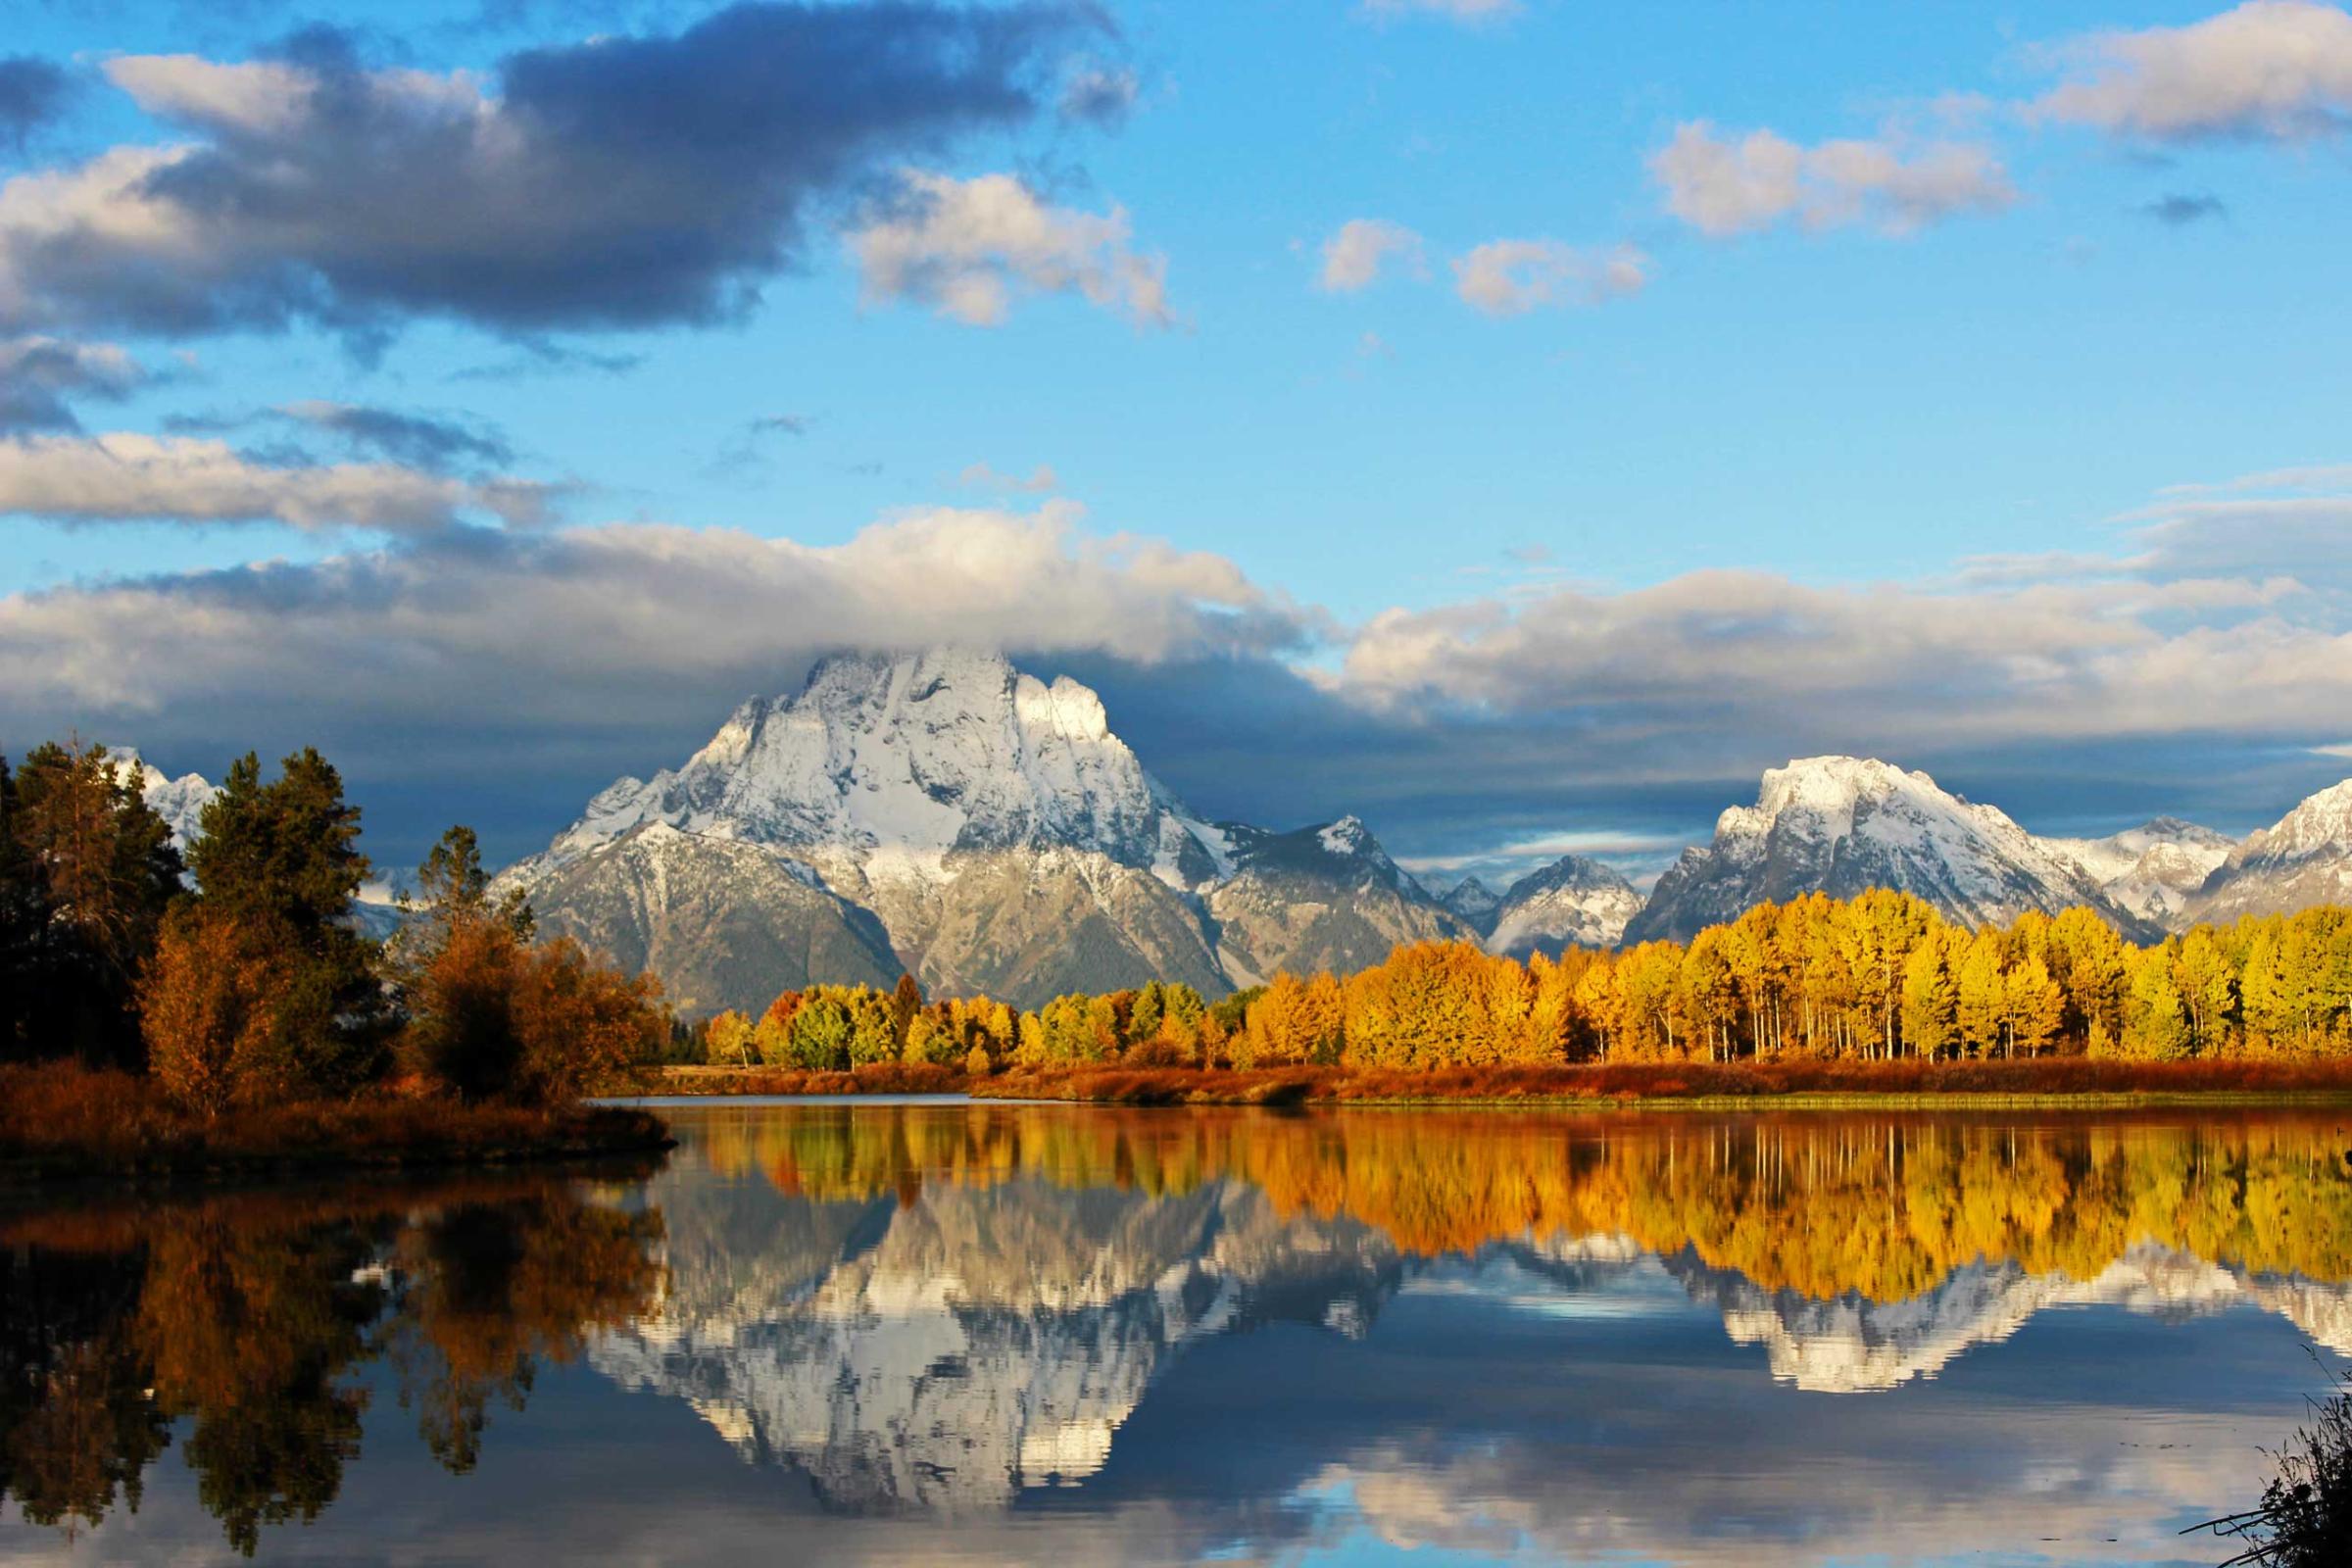 Our public lands give some of the most spectacular views, like this one of Grand Teton National Park in Wyoming